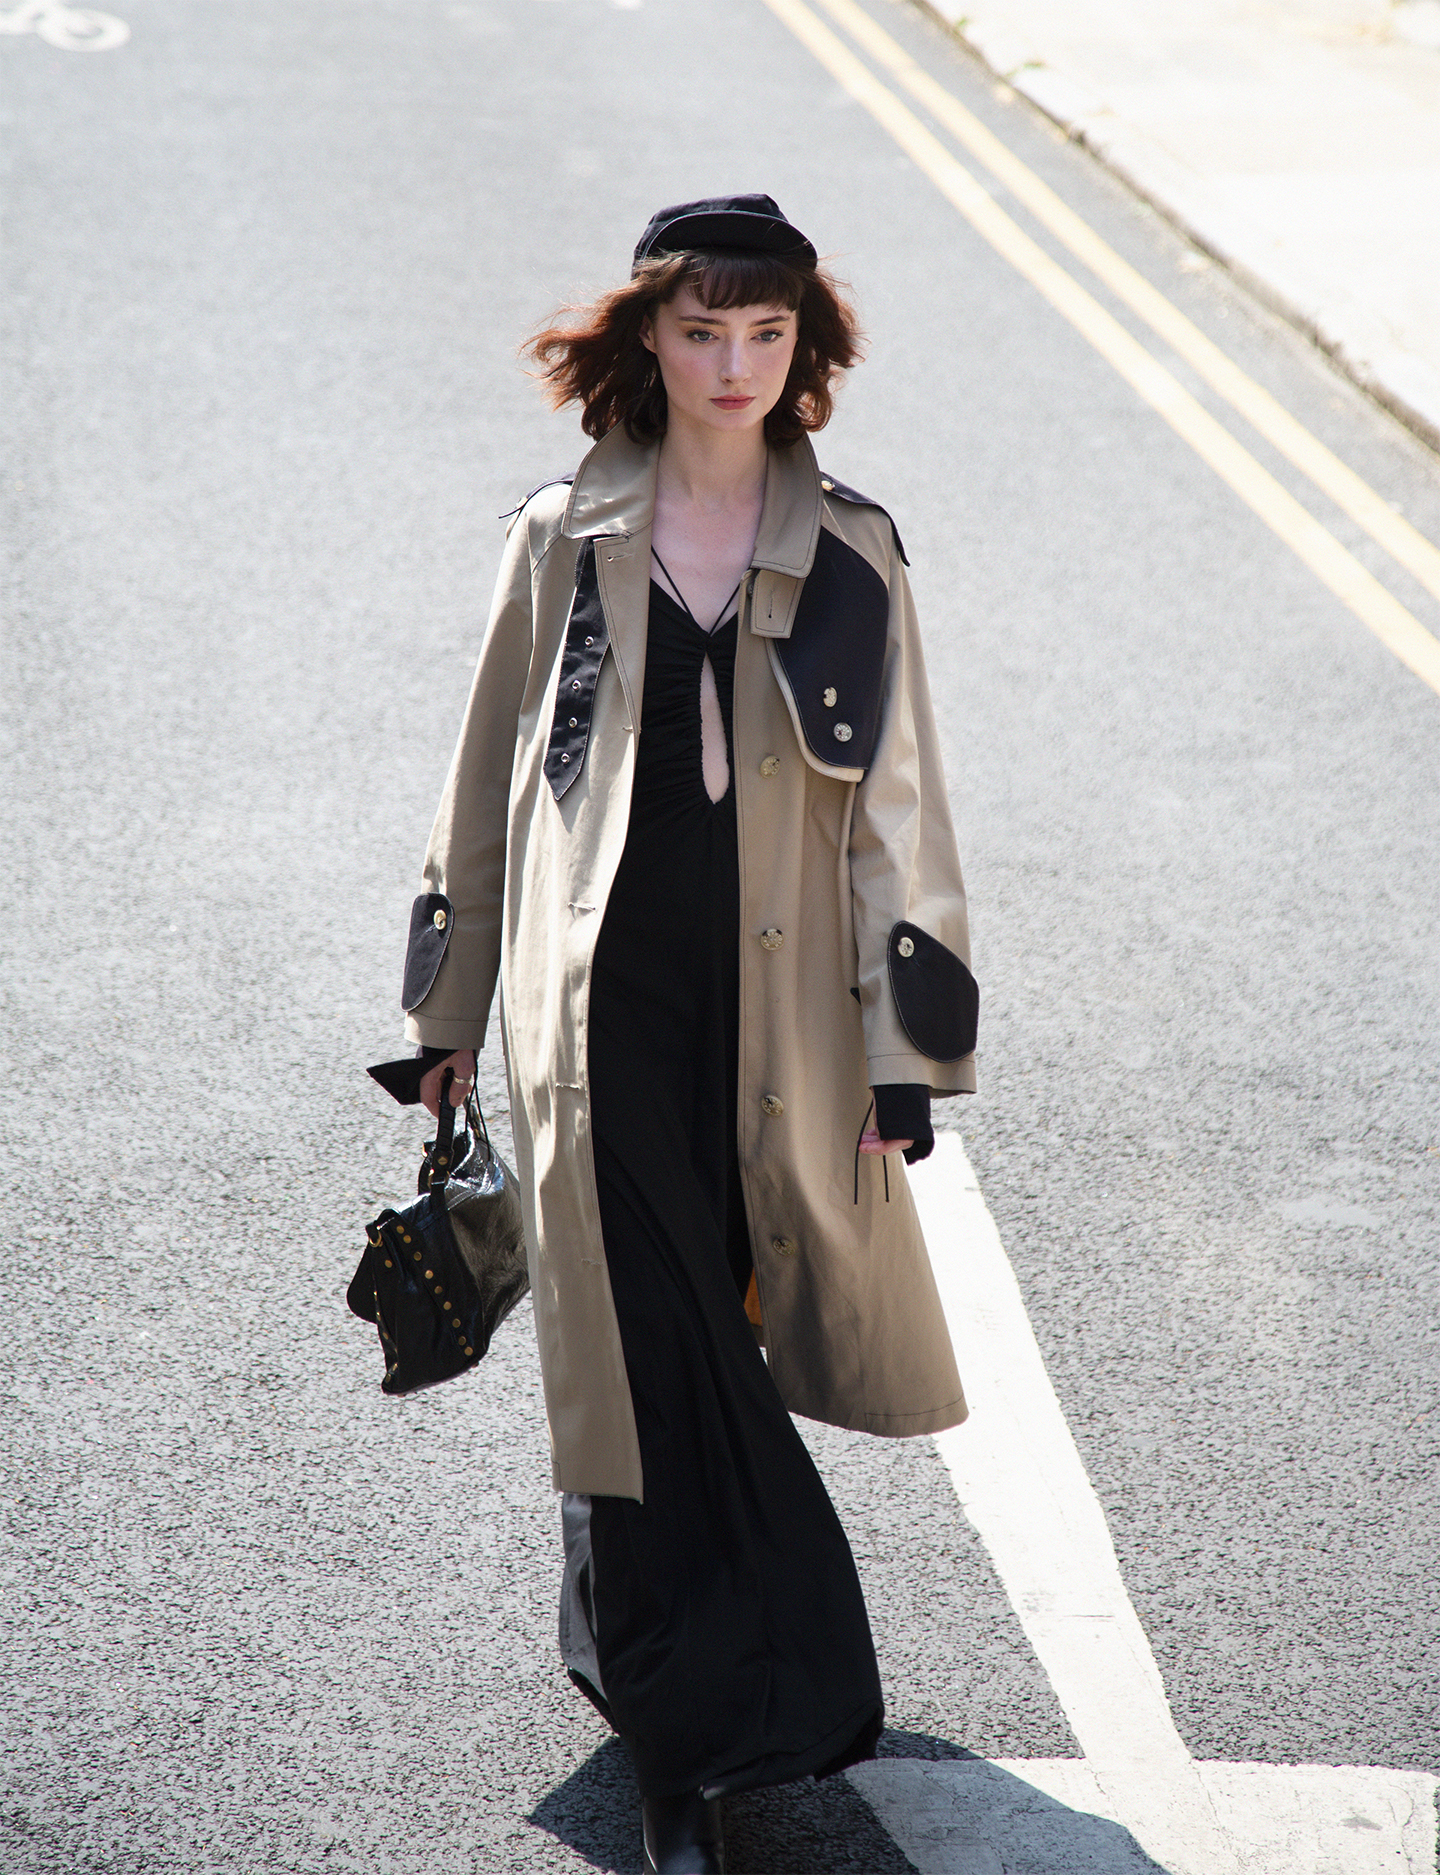 The trench coat Lucrezia Grazioli created during her internship experience at Mackintosh. Photo by Nick Clements